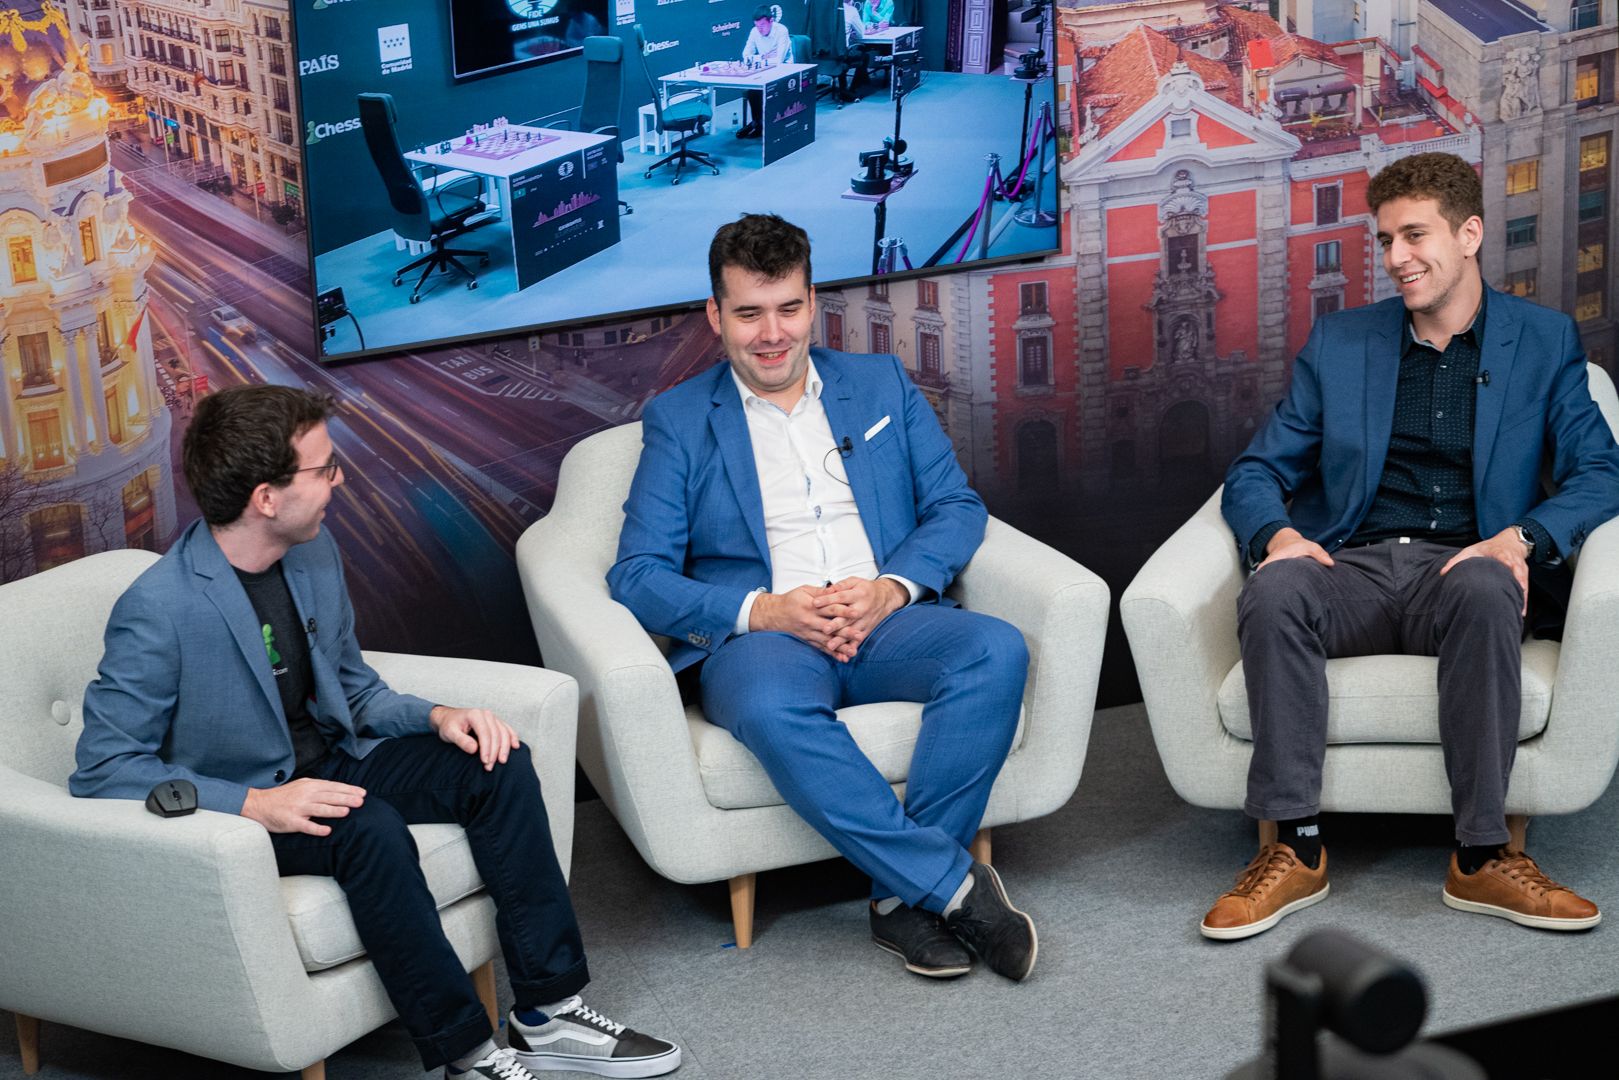 Nepomniachtchi wins again to stack up a near-unassailable lead at Candidates  2022 - Dot Esports